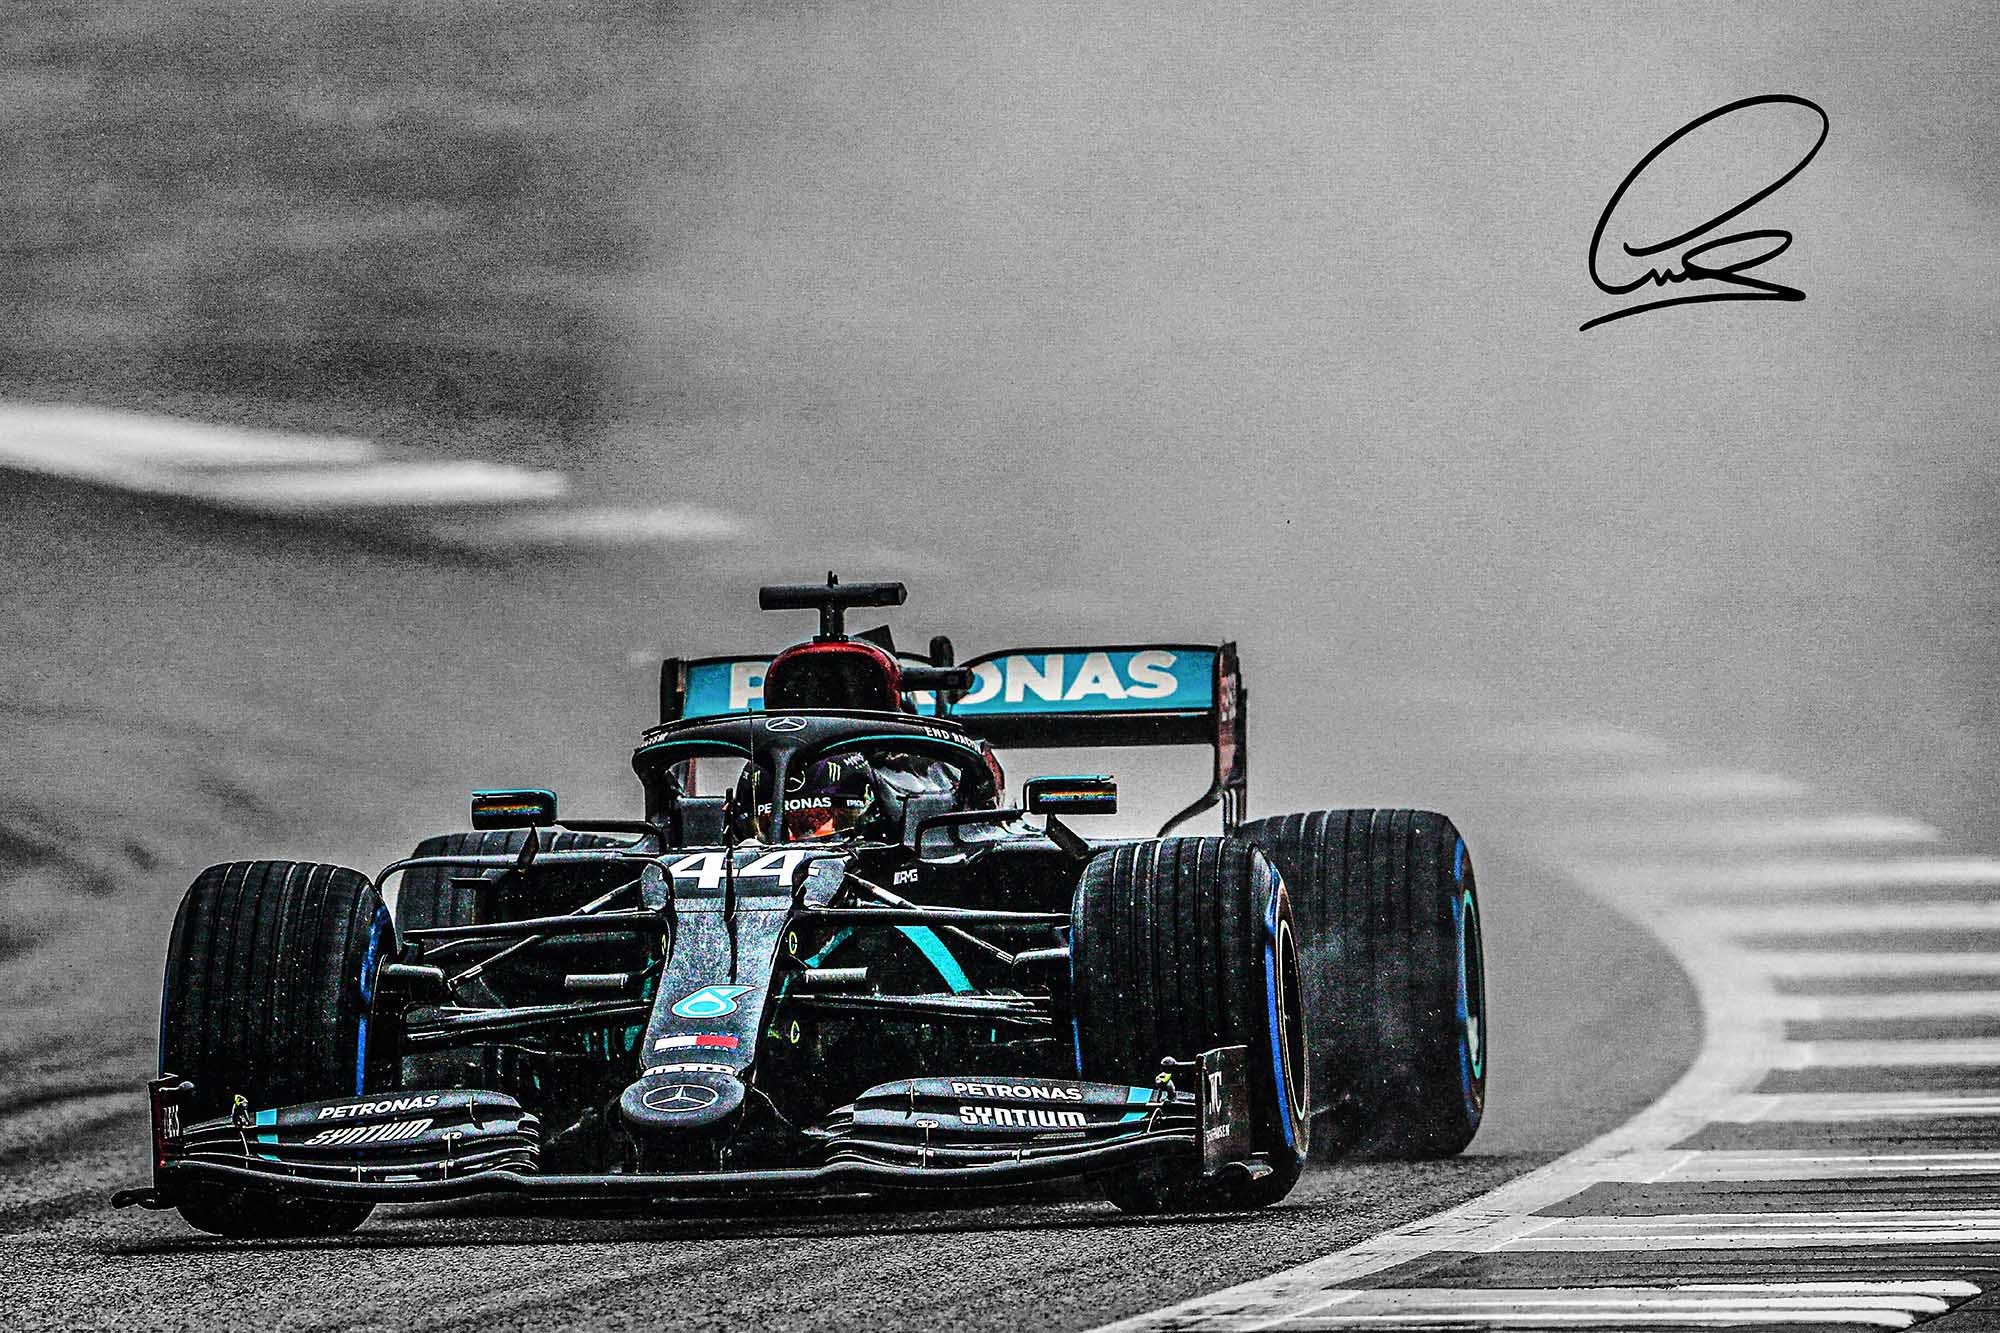  XOTIKS Art Print Poster of Mercedes AMG F1 Racing with  Pre-Printed Lewis Hamilton Autograph - Premium High Gloss Art Print Poster.  (047P) (24”x36”): Posters & Prints